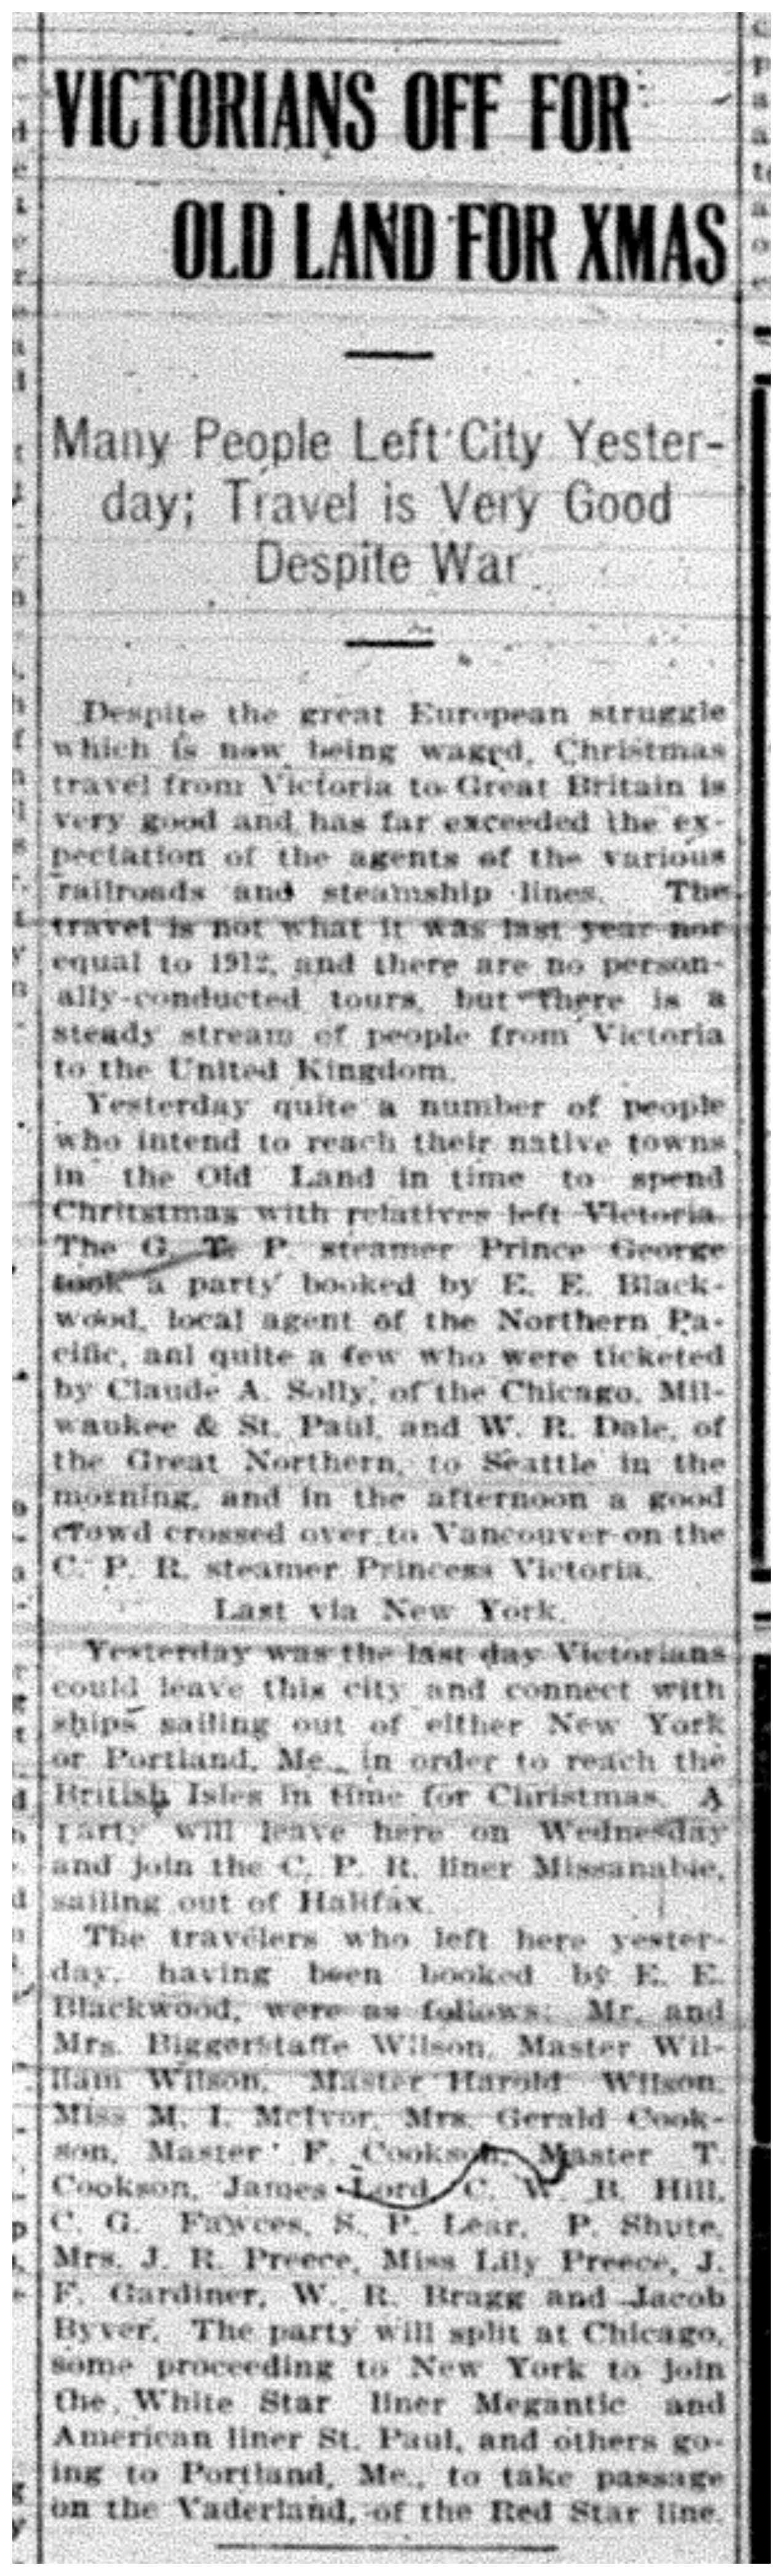 "Victorians Off for Old Land for Xmas"